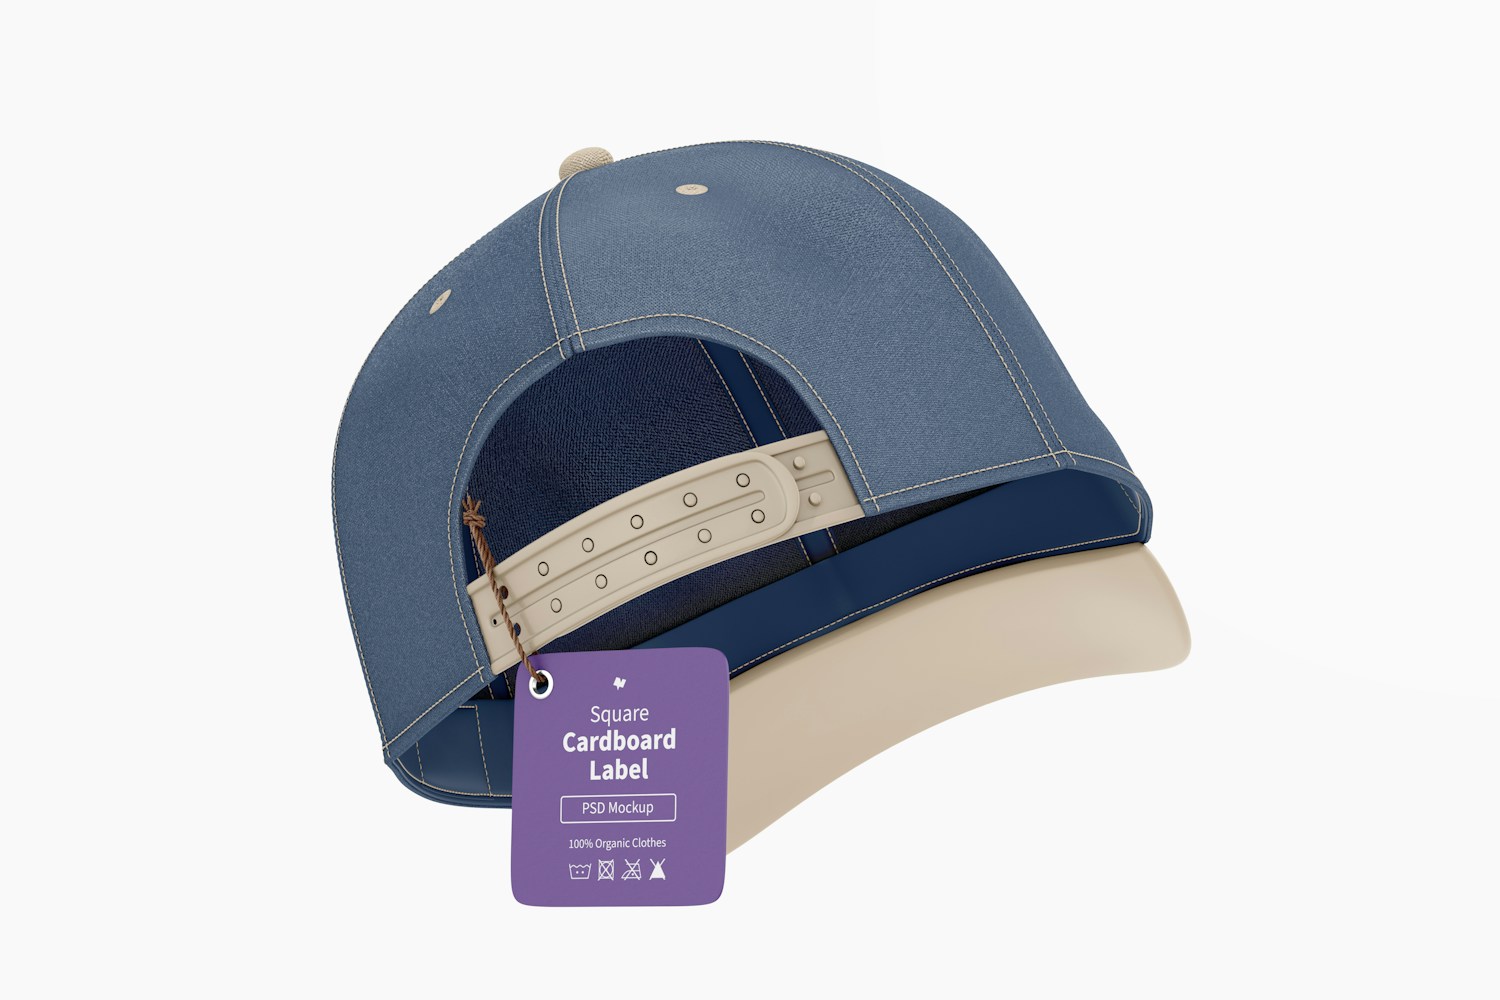 Square Cardboard Label with Rope on a Cap Mockup